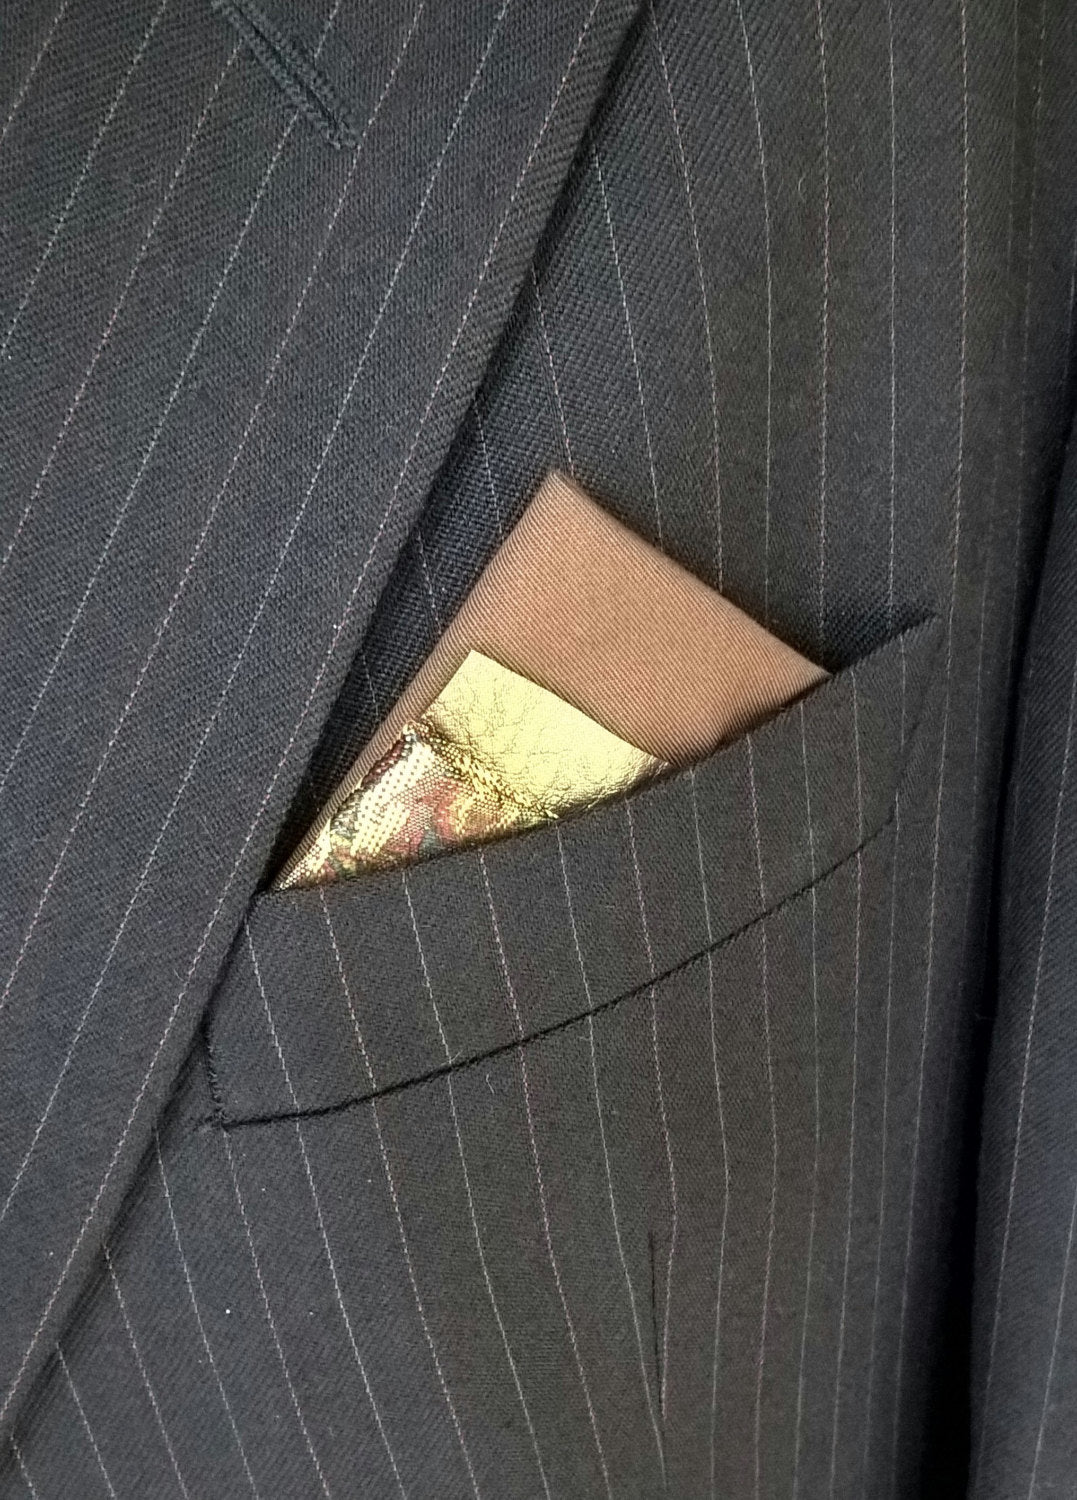 Brown and Gold Pre Folded Pocket Square, Mens Wedding Suit Handkerchief